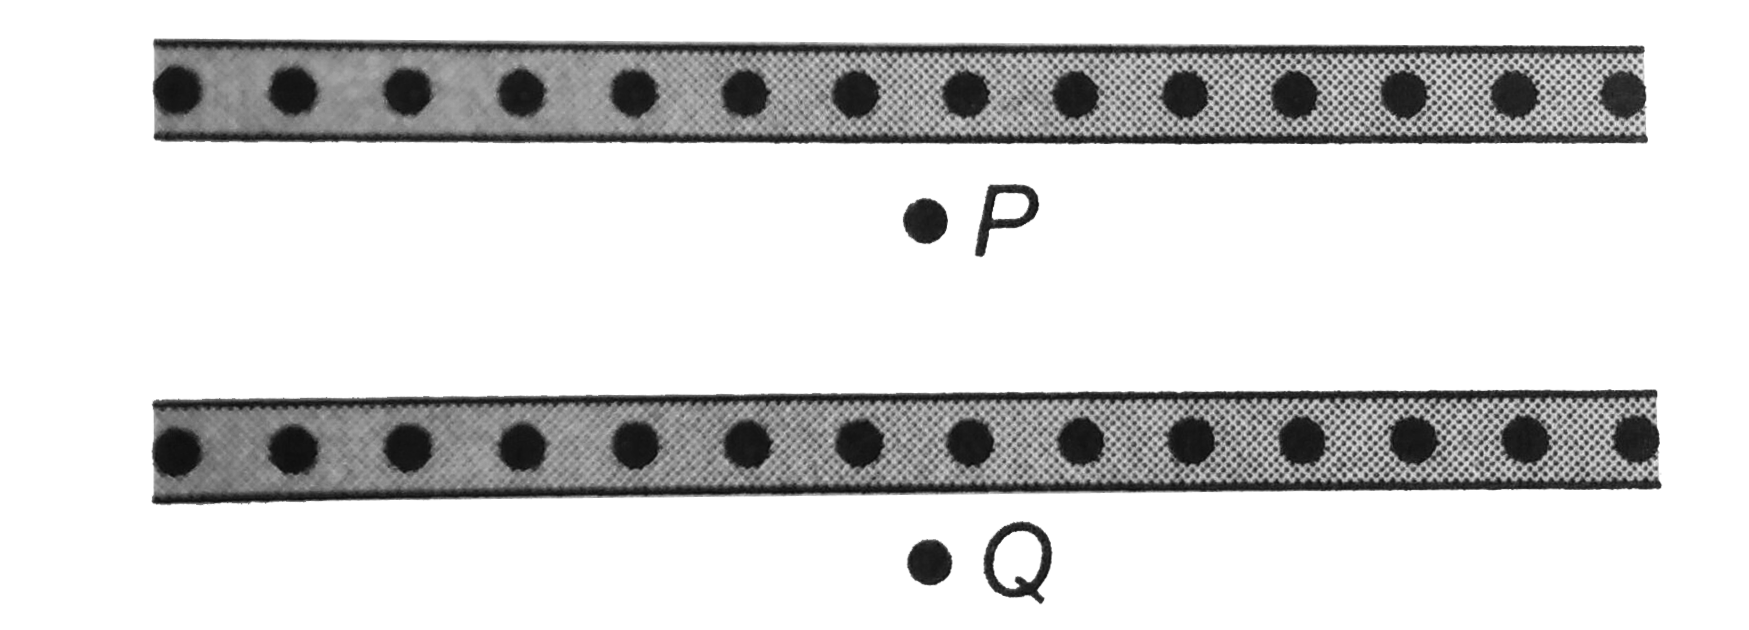 Two infinite plates shown in cross-section in figure carry lamda  amperes of current out of thepage per unit width of plate. Find the magnetic field at points P and Q.